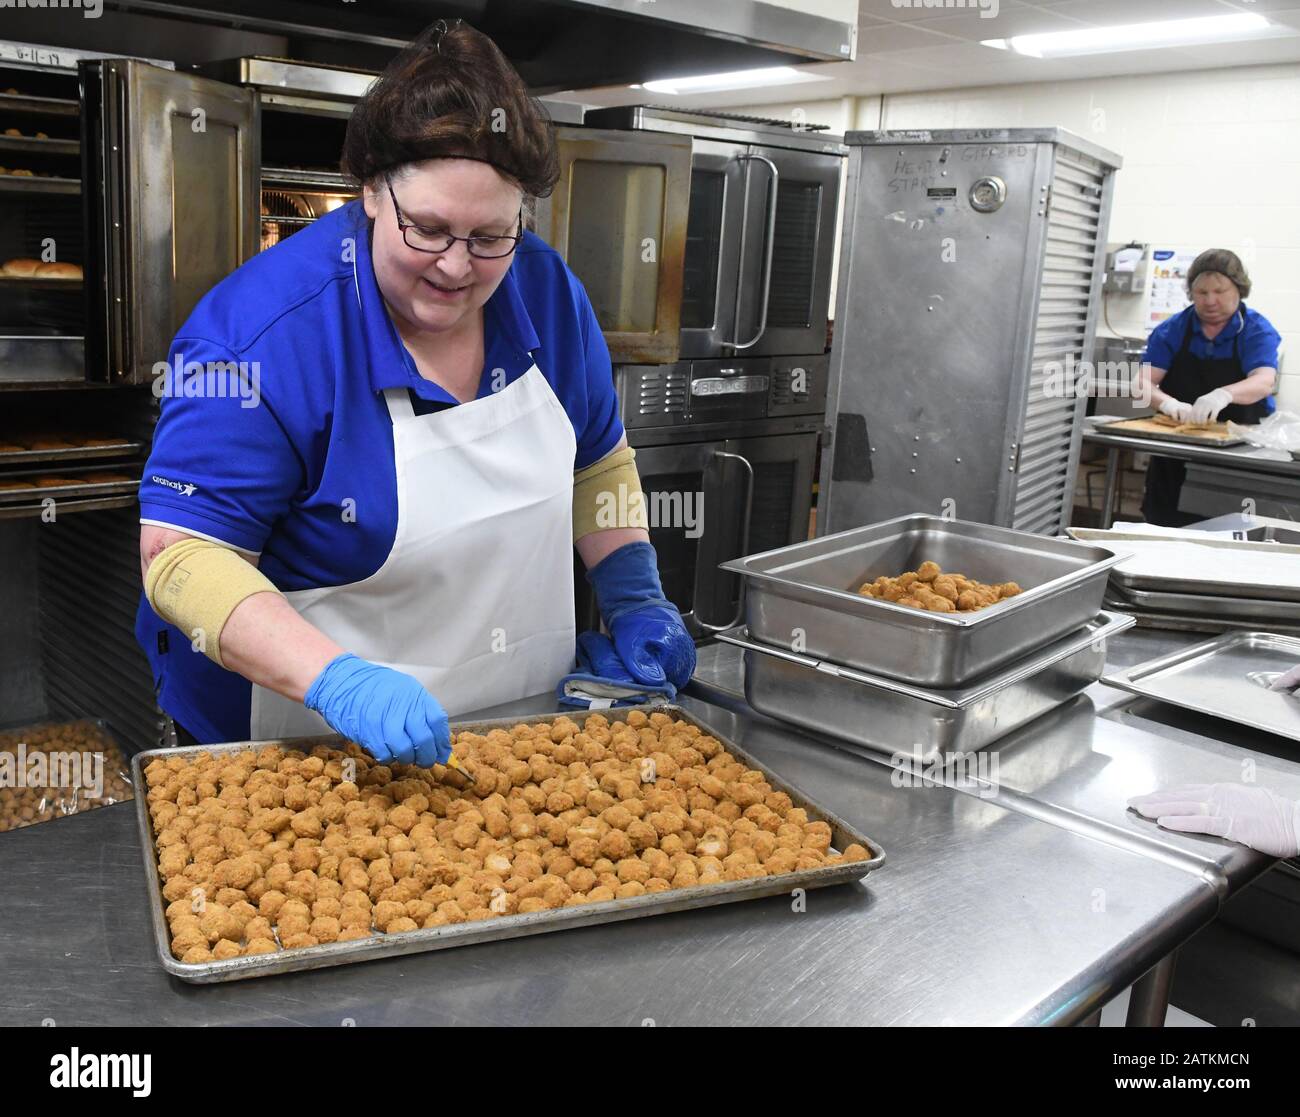 Racine, Wisconsin, USA. 3rd Feb, 2020. School lunches are prepared at Gifford (K-8) School in Racine, Wisconsin Monday February 3, 2020.SHERI BENISH checks the temperature of popcorn chicken balls she just took out of the oven. The Trump Administration has proposed relaxing some of the nutrition standards adopted for school lunches during the Obama Administration. Some school lunch officials have welcome the changes because they say by making the meals more palatable and like what students eat at home, students will be more inclined to eat a full lunch, and there will be less wasted food. Stock Photo